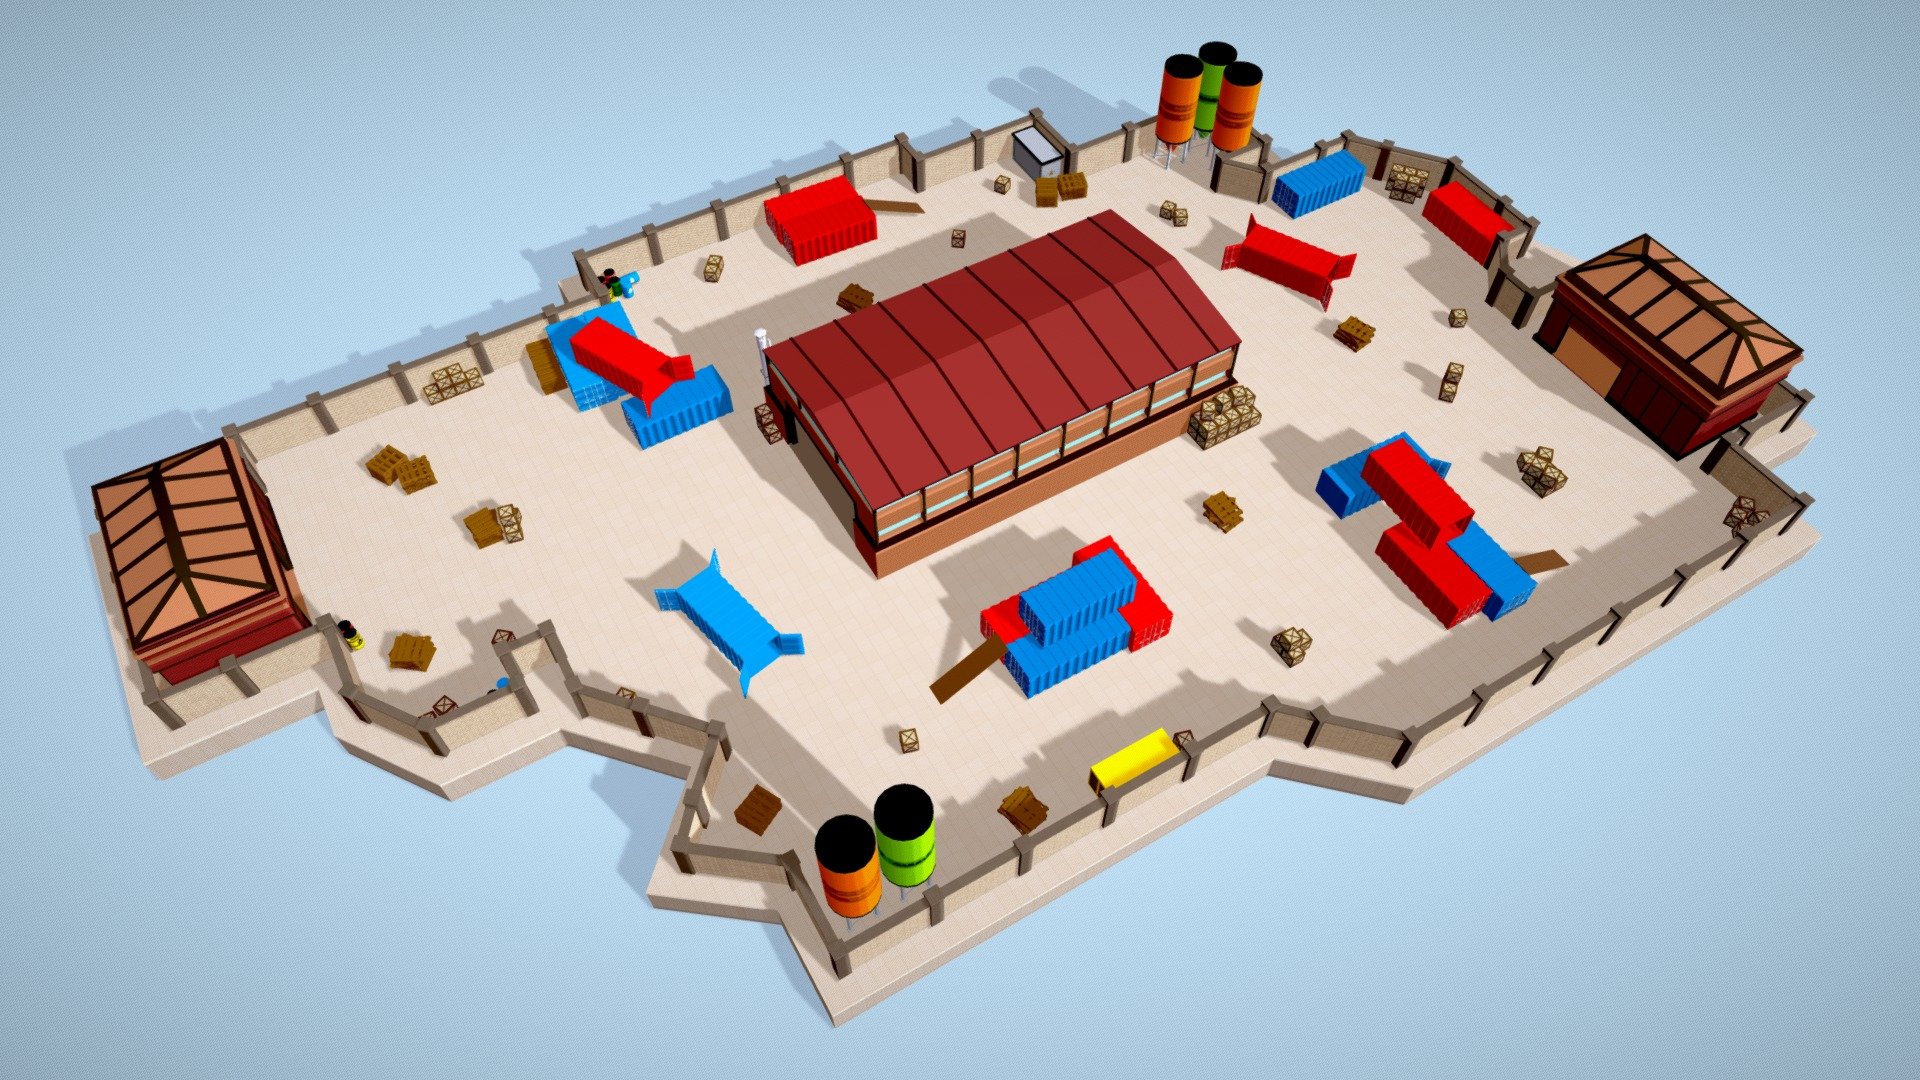 This map area includes very useful assets which can be used for FPS games.
It includes various things like Drums, Barrels, Wooden Boxes, Ware House, garages, Containers, Chemical barrels, Explosive TNT Boxes, etc with very nice wall boundaries.
All the models are low-poly models and were originally modeled in Blender.

Enjoy this environment map pack for your various usages like showcasing the area, Various games, Rendering, or whatever you want. Leave valuable feedback in the comments section below. Thank you 3d model